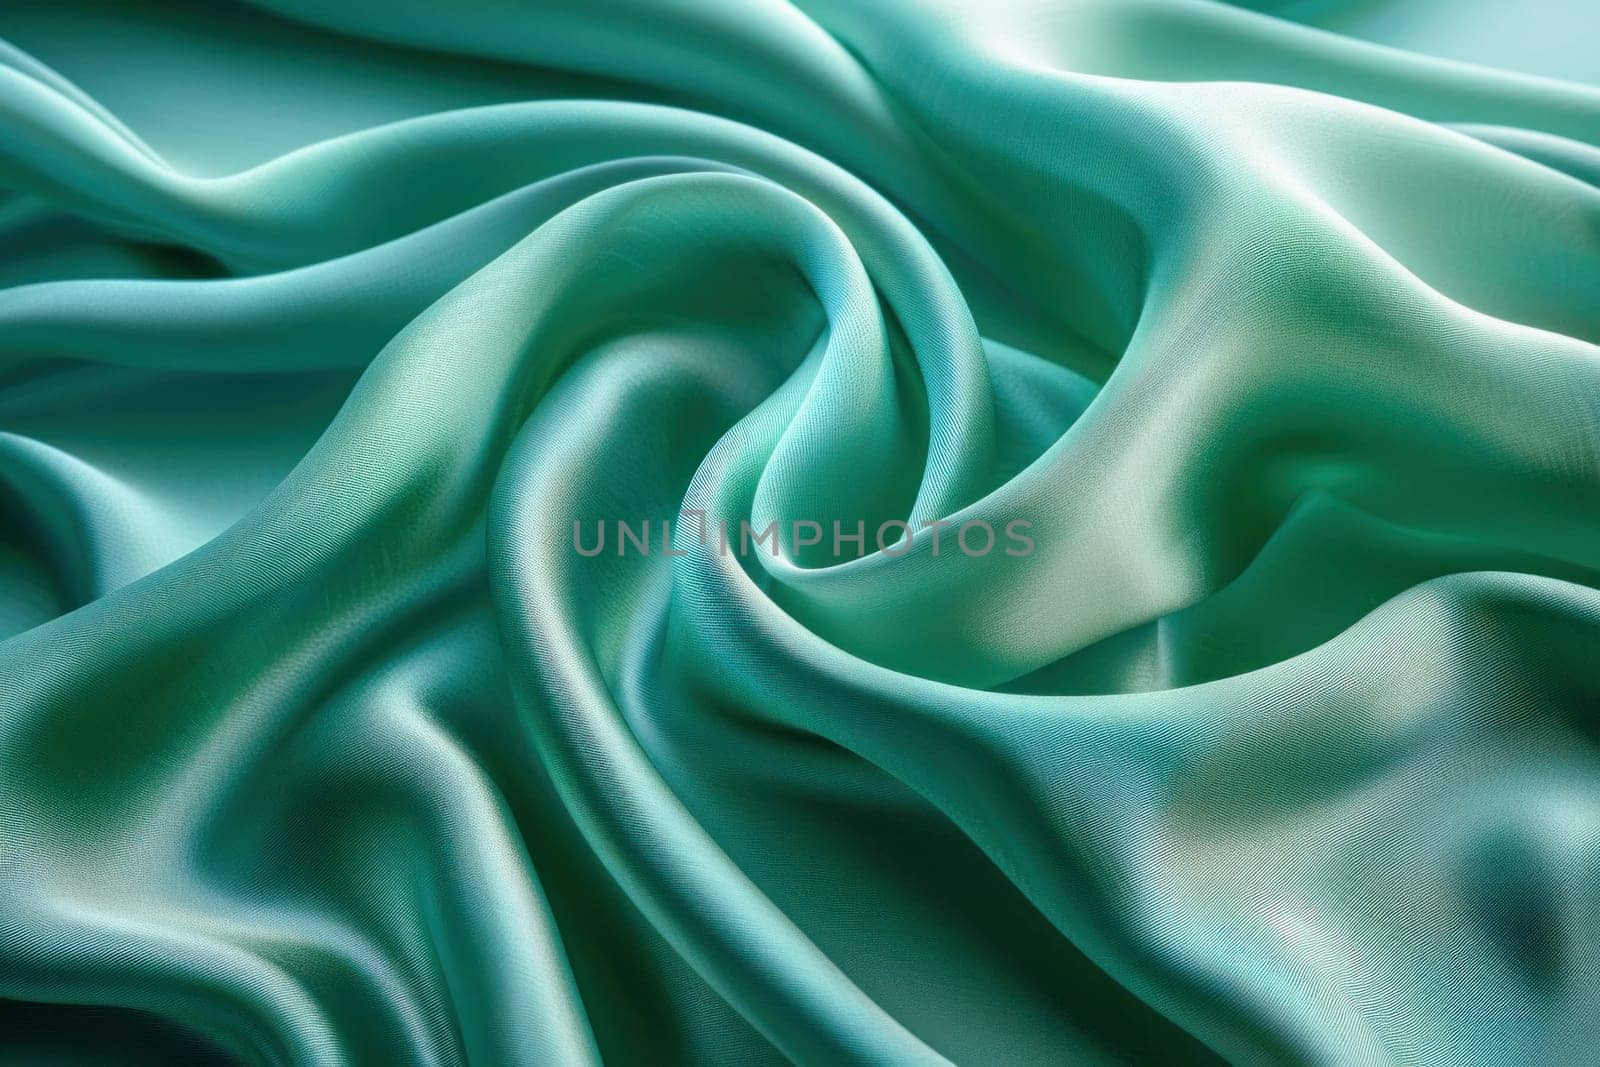 This image provides a detailed look at a glossy green satin textile, displaying its complex texture beautifully